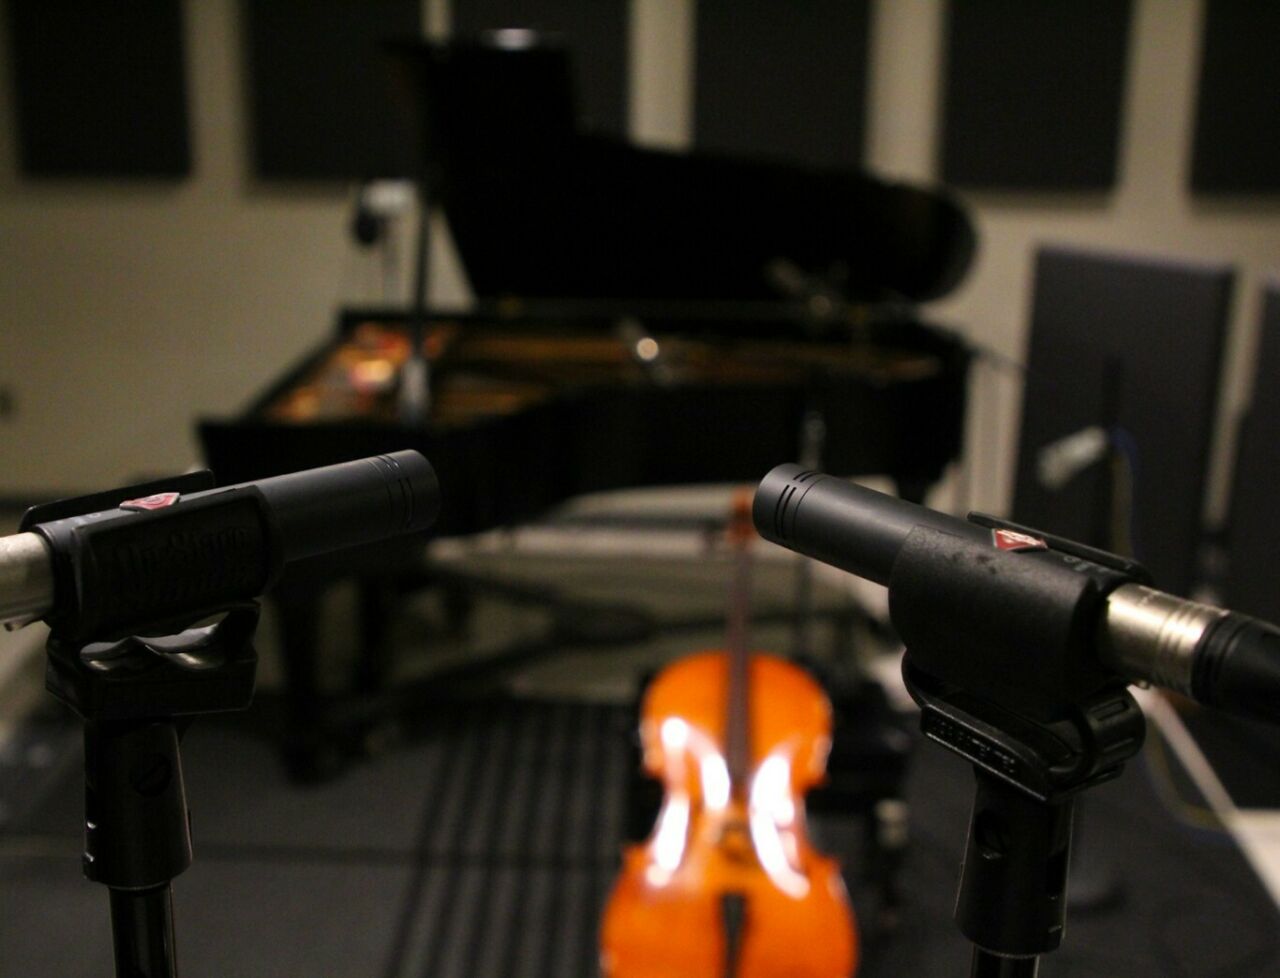 Microphones in the foreground, with instruments and recording equipment in the Penn State ROARS studio.